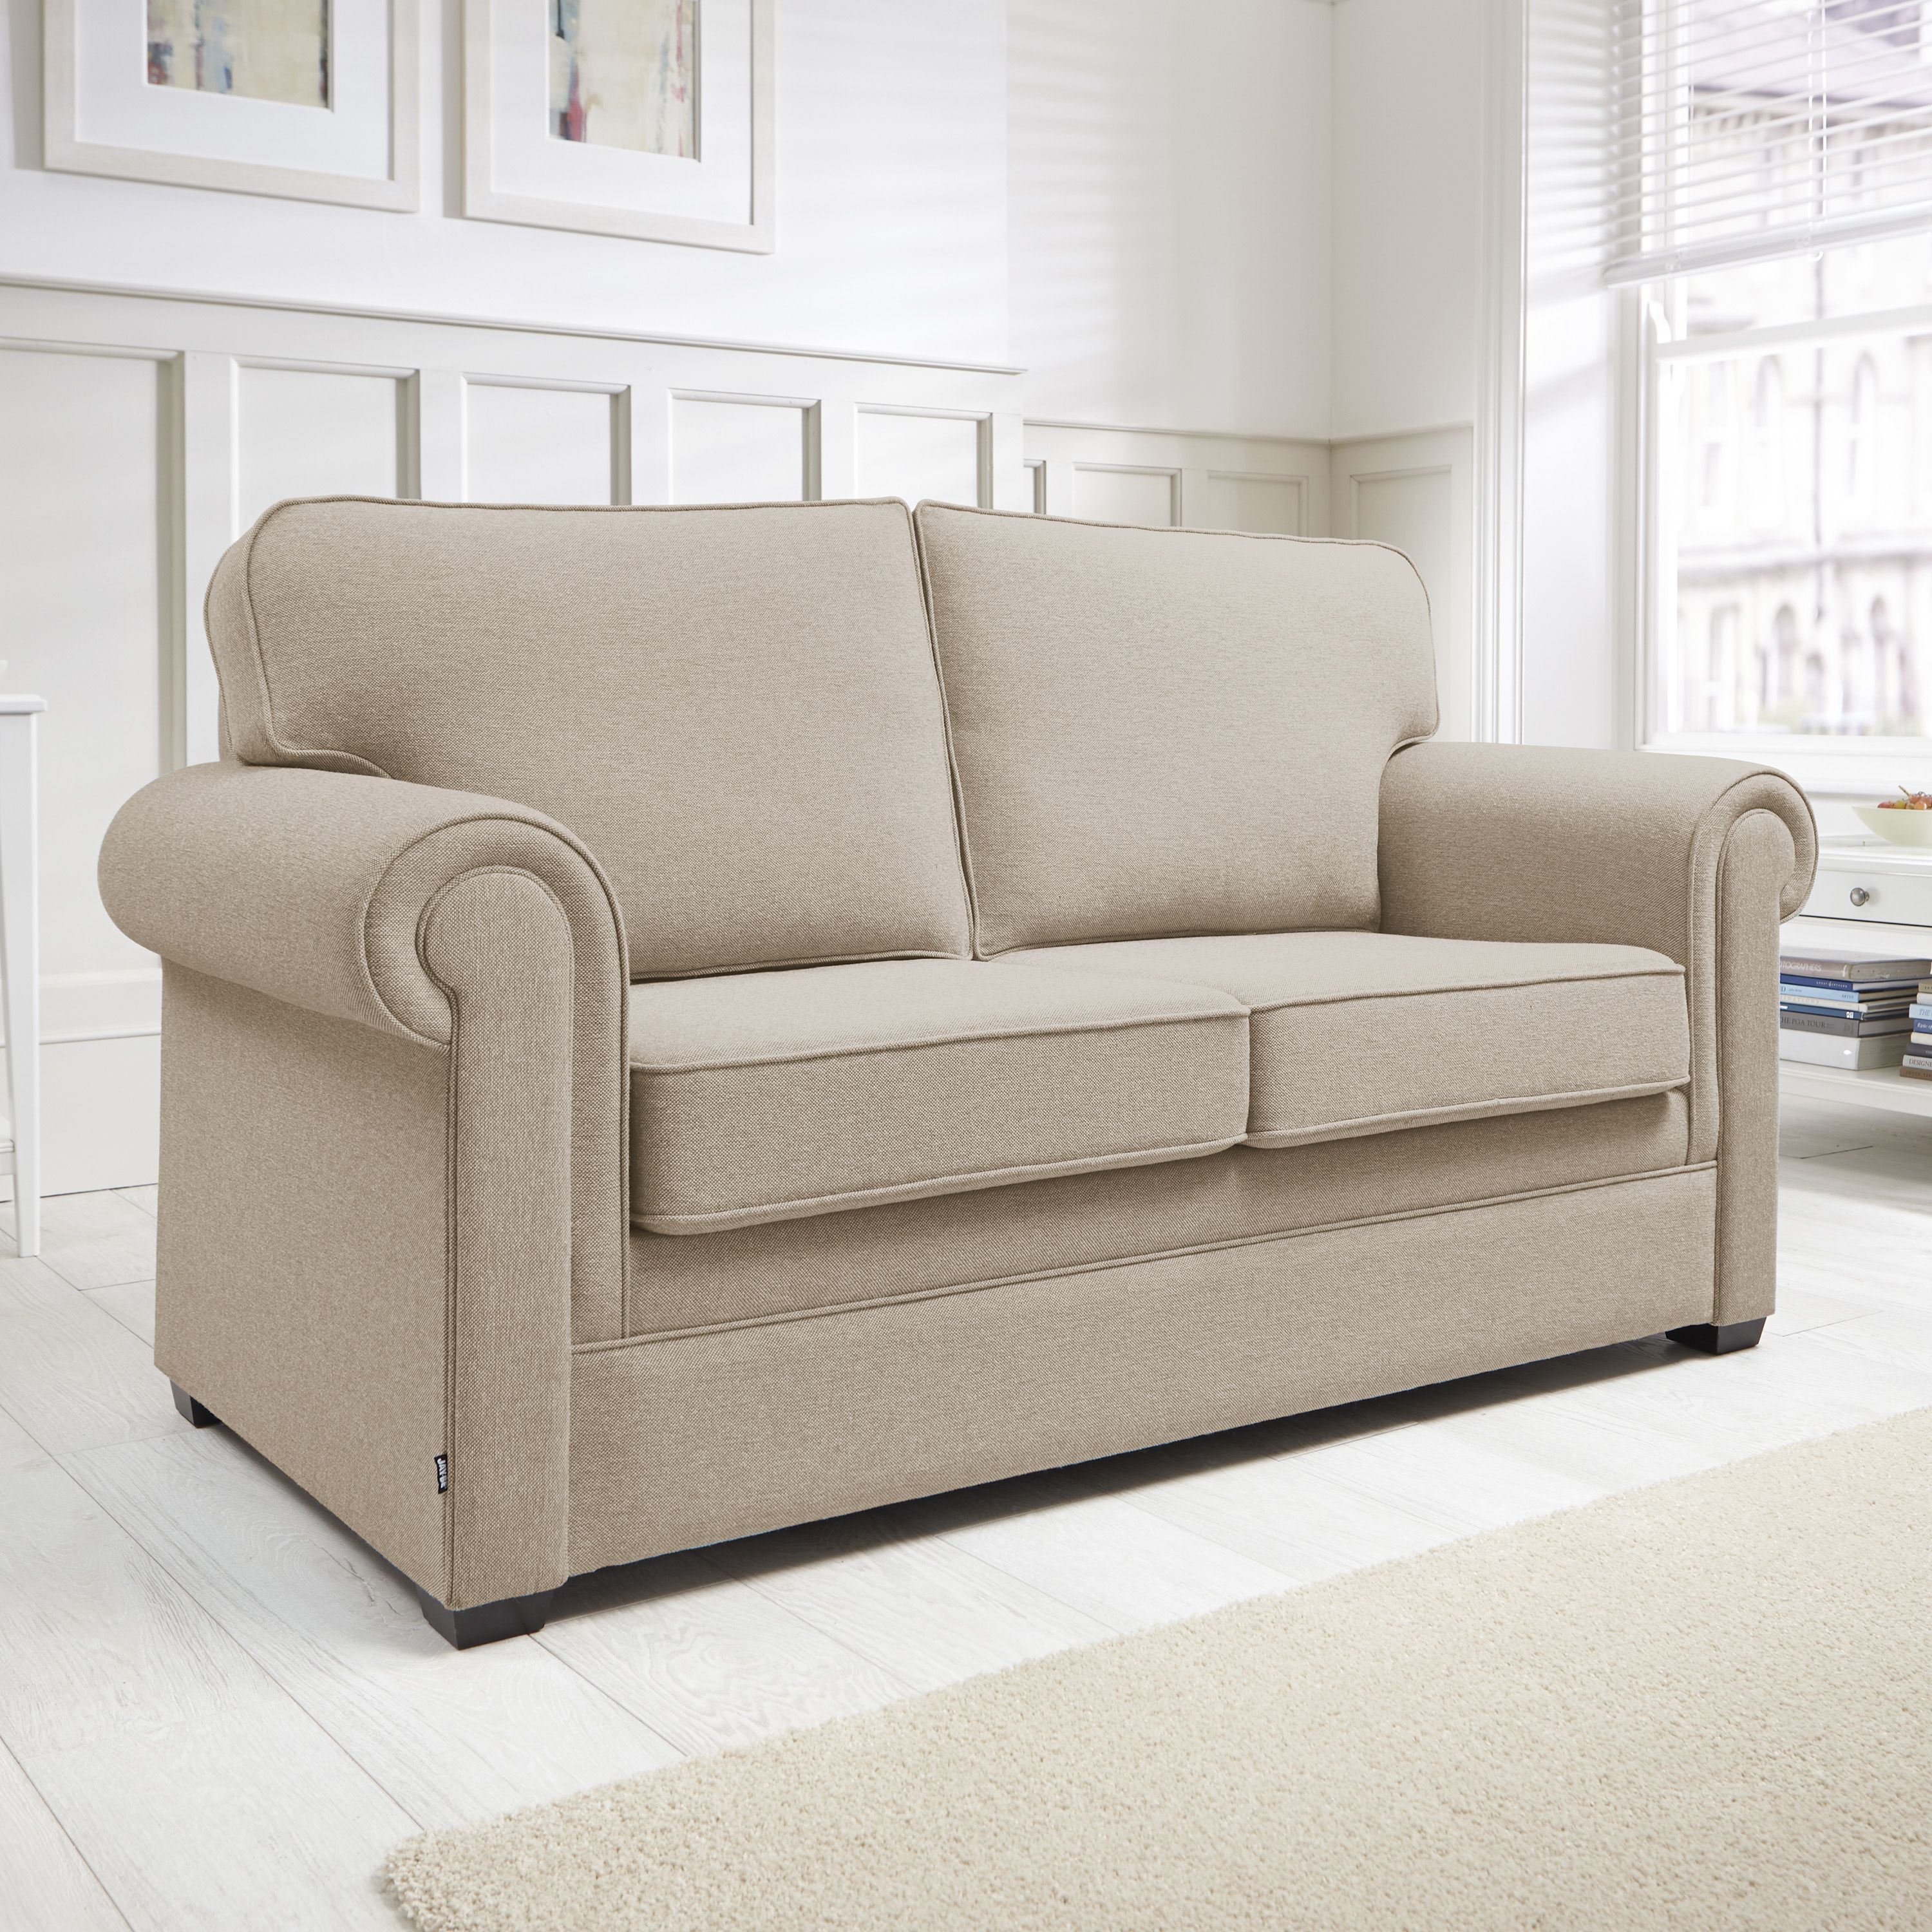 Jay-Be Classic Autumn 2 Seater Sofa bed